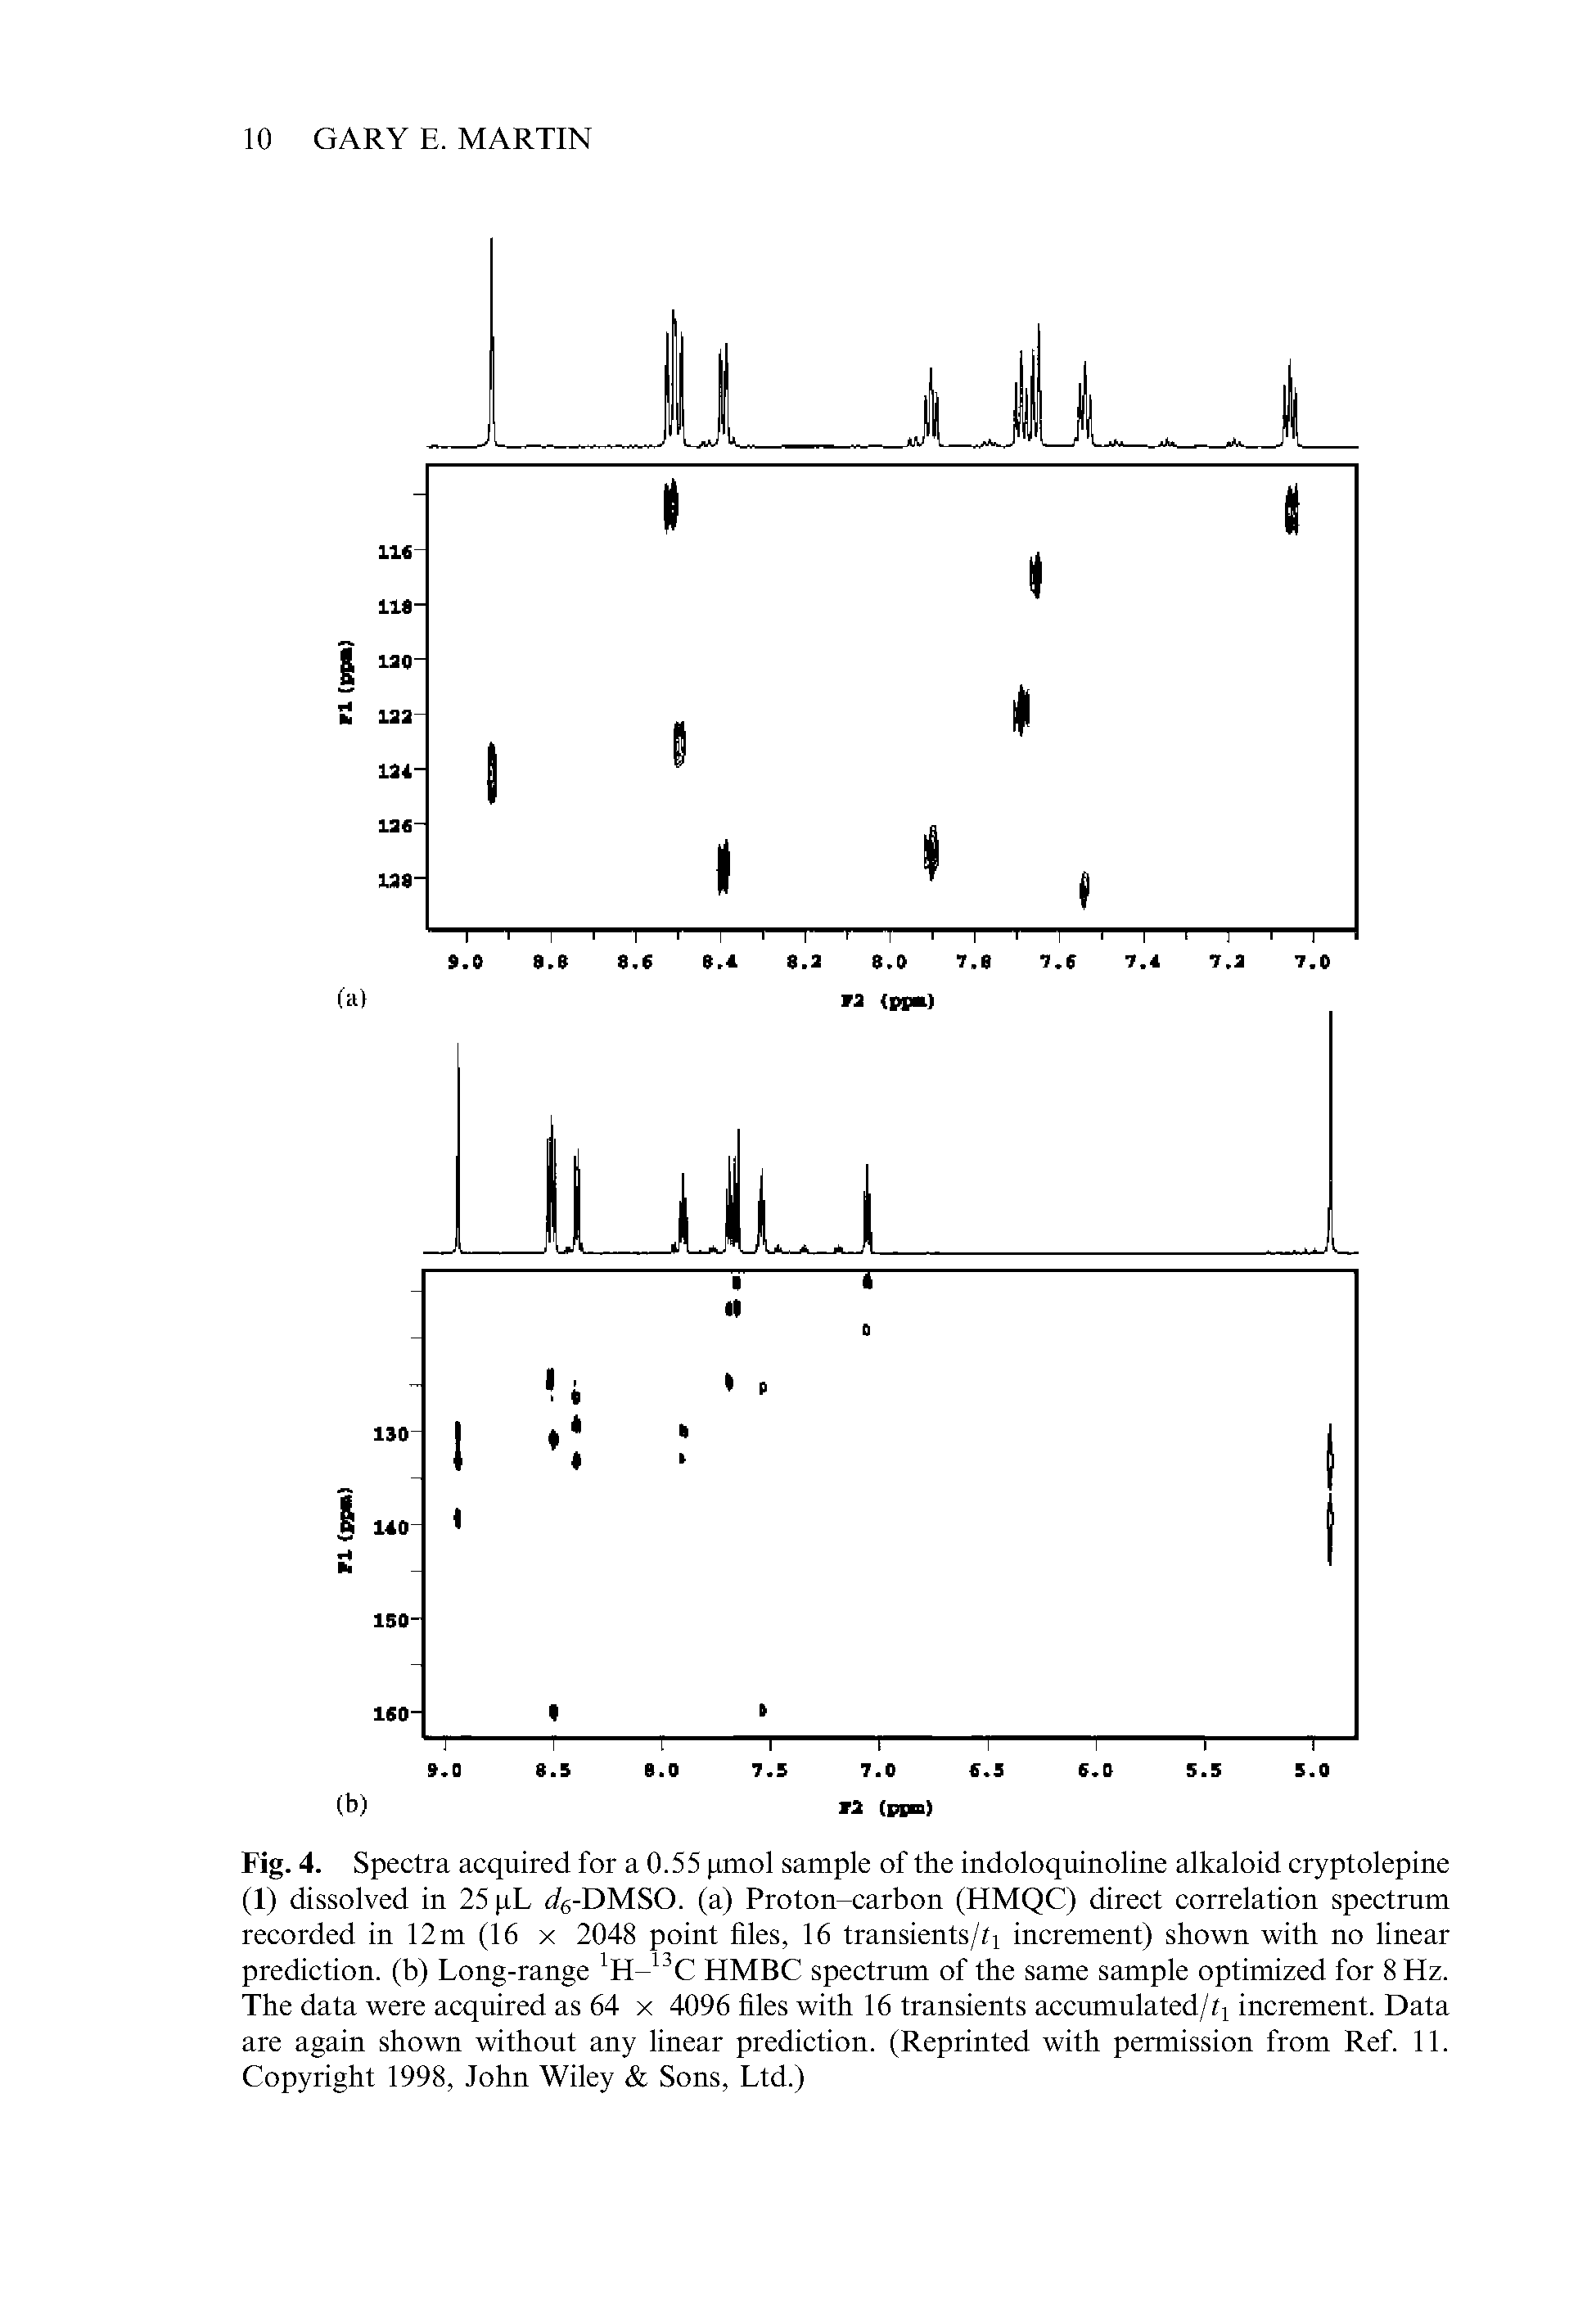 Fig. 4. Spectra acquired for a 0.55 pmol sample of the indoloquinoline alkaloid cryptolepine (1) dissolved in 25 pL J6-DMSO. (a) Proton-carbon (HMQC) direct correlation spectrum recorded in 12m (16 x 2048 point files, 16 transients/ increment) shown with no linear prediction, (b) Long-range 1H-13C HMBC spectrum of the same sample optimized for 8 Hz. The data were acquired as 64 x 4096 files with 16 transients accumulated/ increment. Data are again shown without any linear prediction. (Reprinted with permission from Ref. 11. Copyright 1998, John Wiley Sons, Ltd.)...